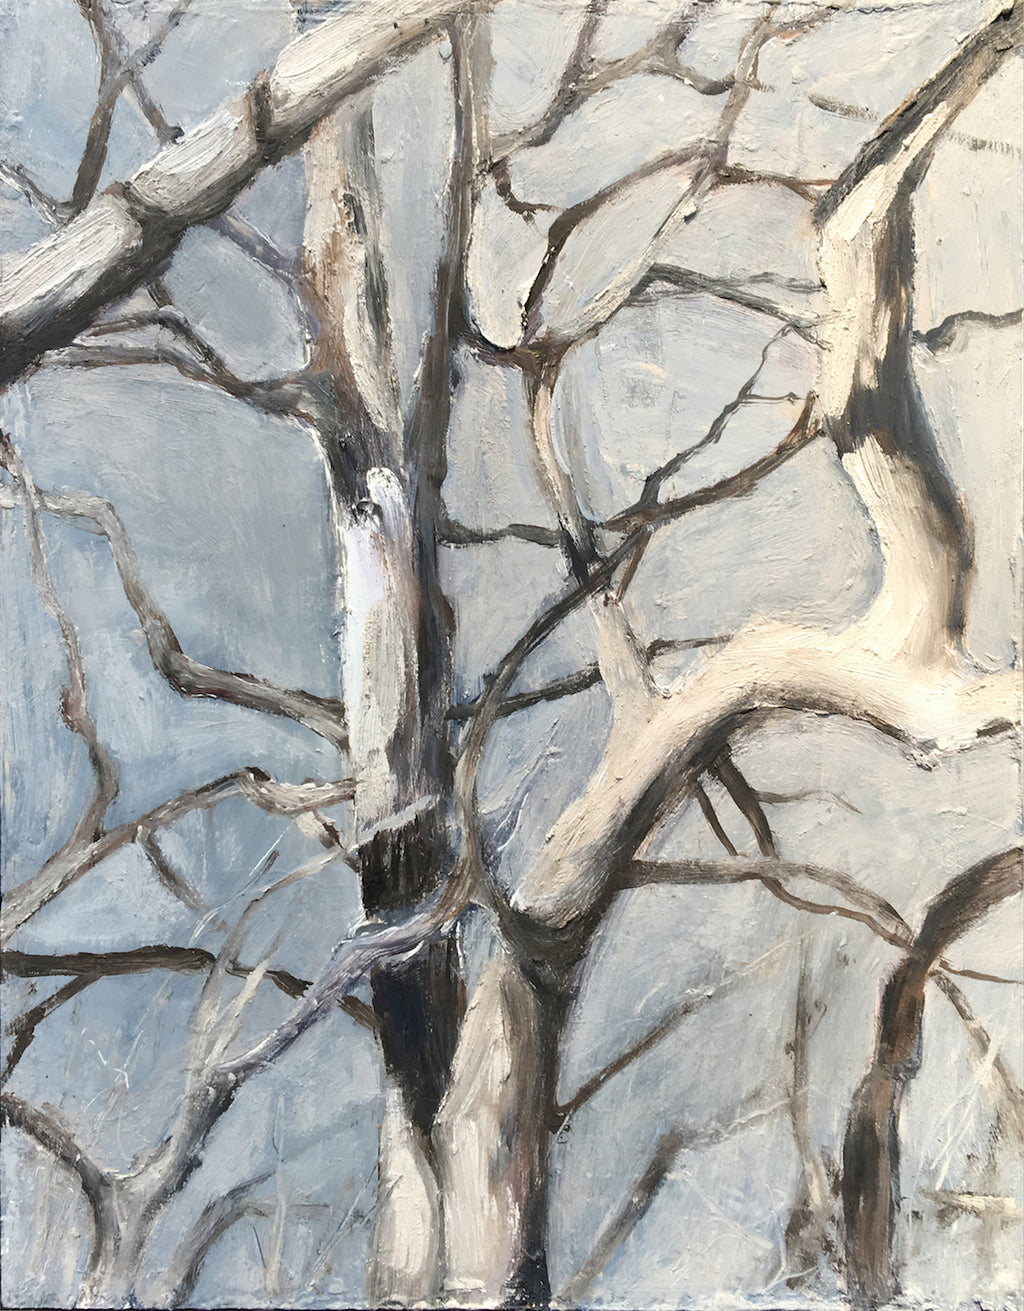 An intimate observation of the mingling branches that weave together to form this delicate composition filled with movement and freedom. Third in a series of three vignettes painted from Isabelle's favorite old sycamore tree.